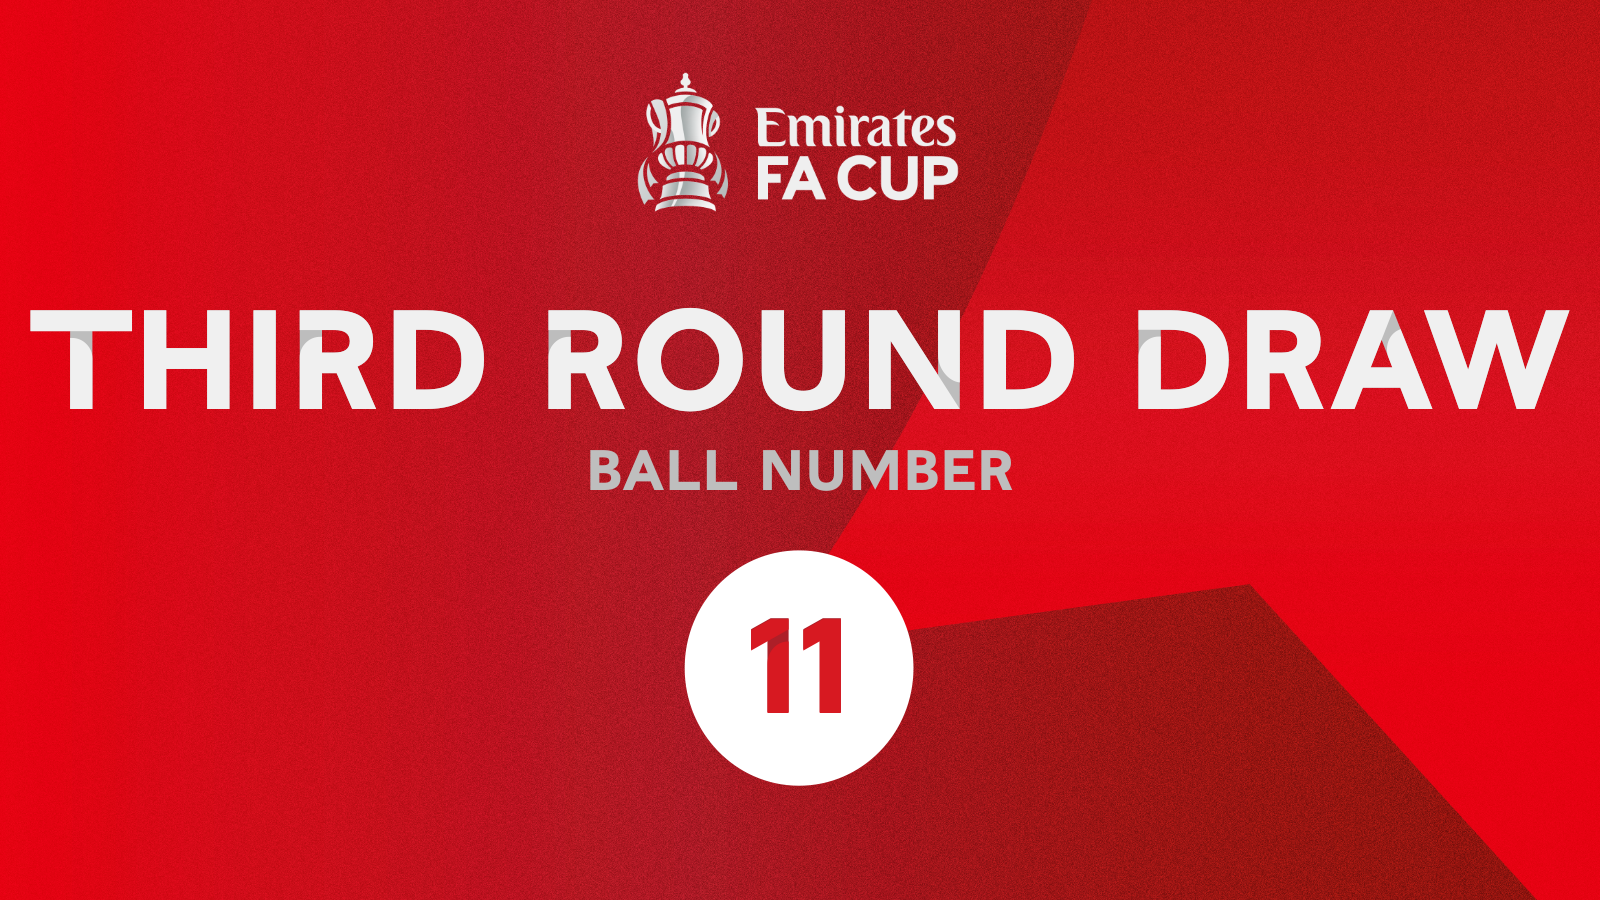 Emirates FA Cup Third Round Draw - Ball number 11